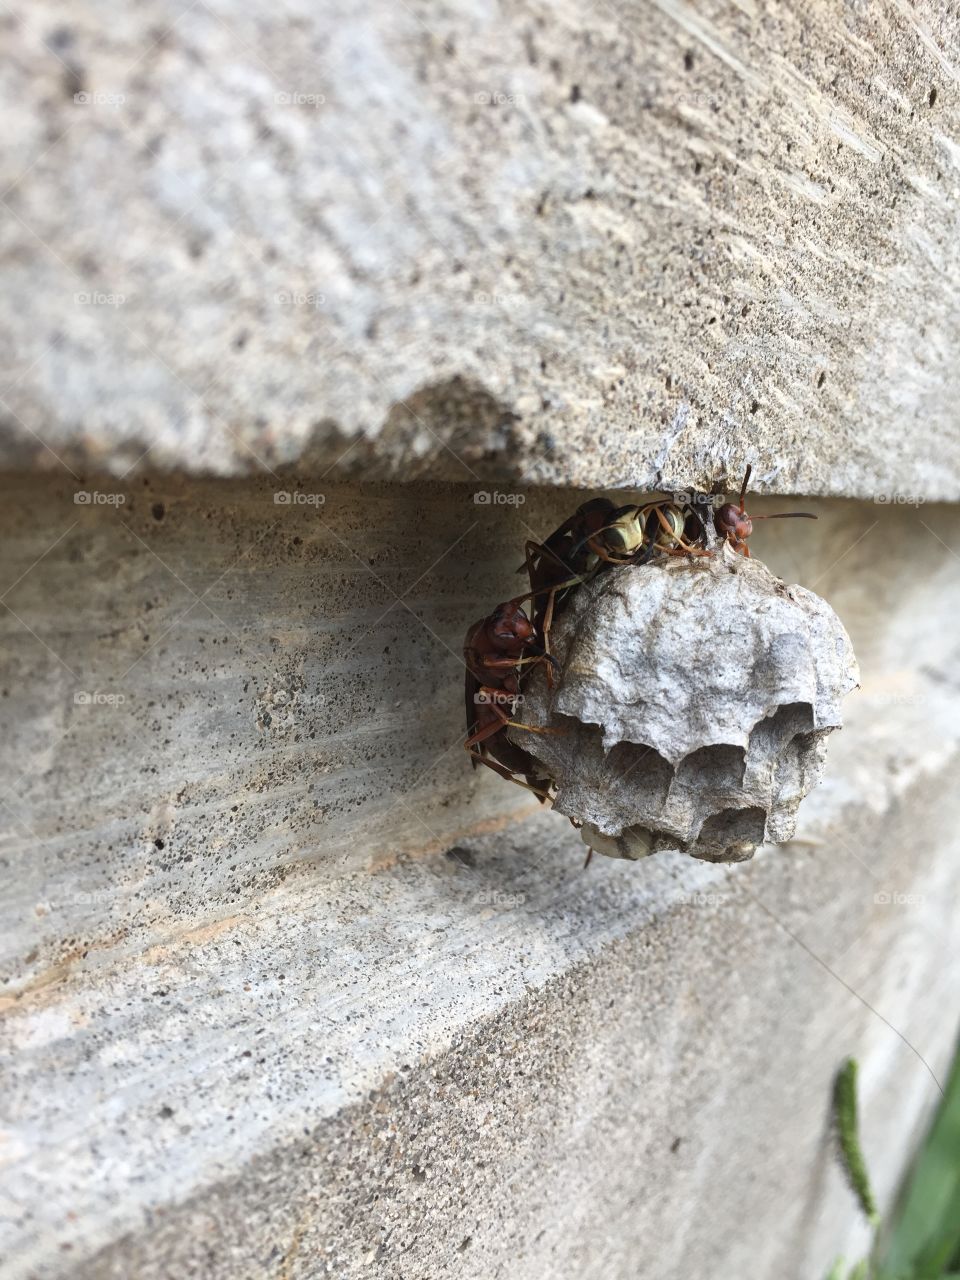 Some wasps decided to stay home today